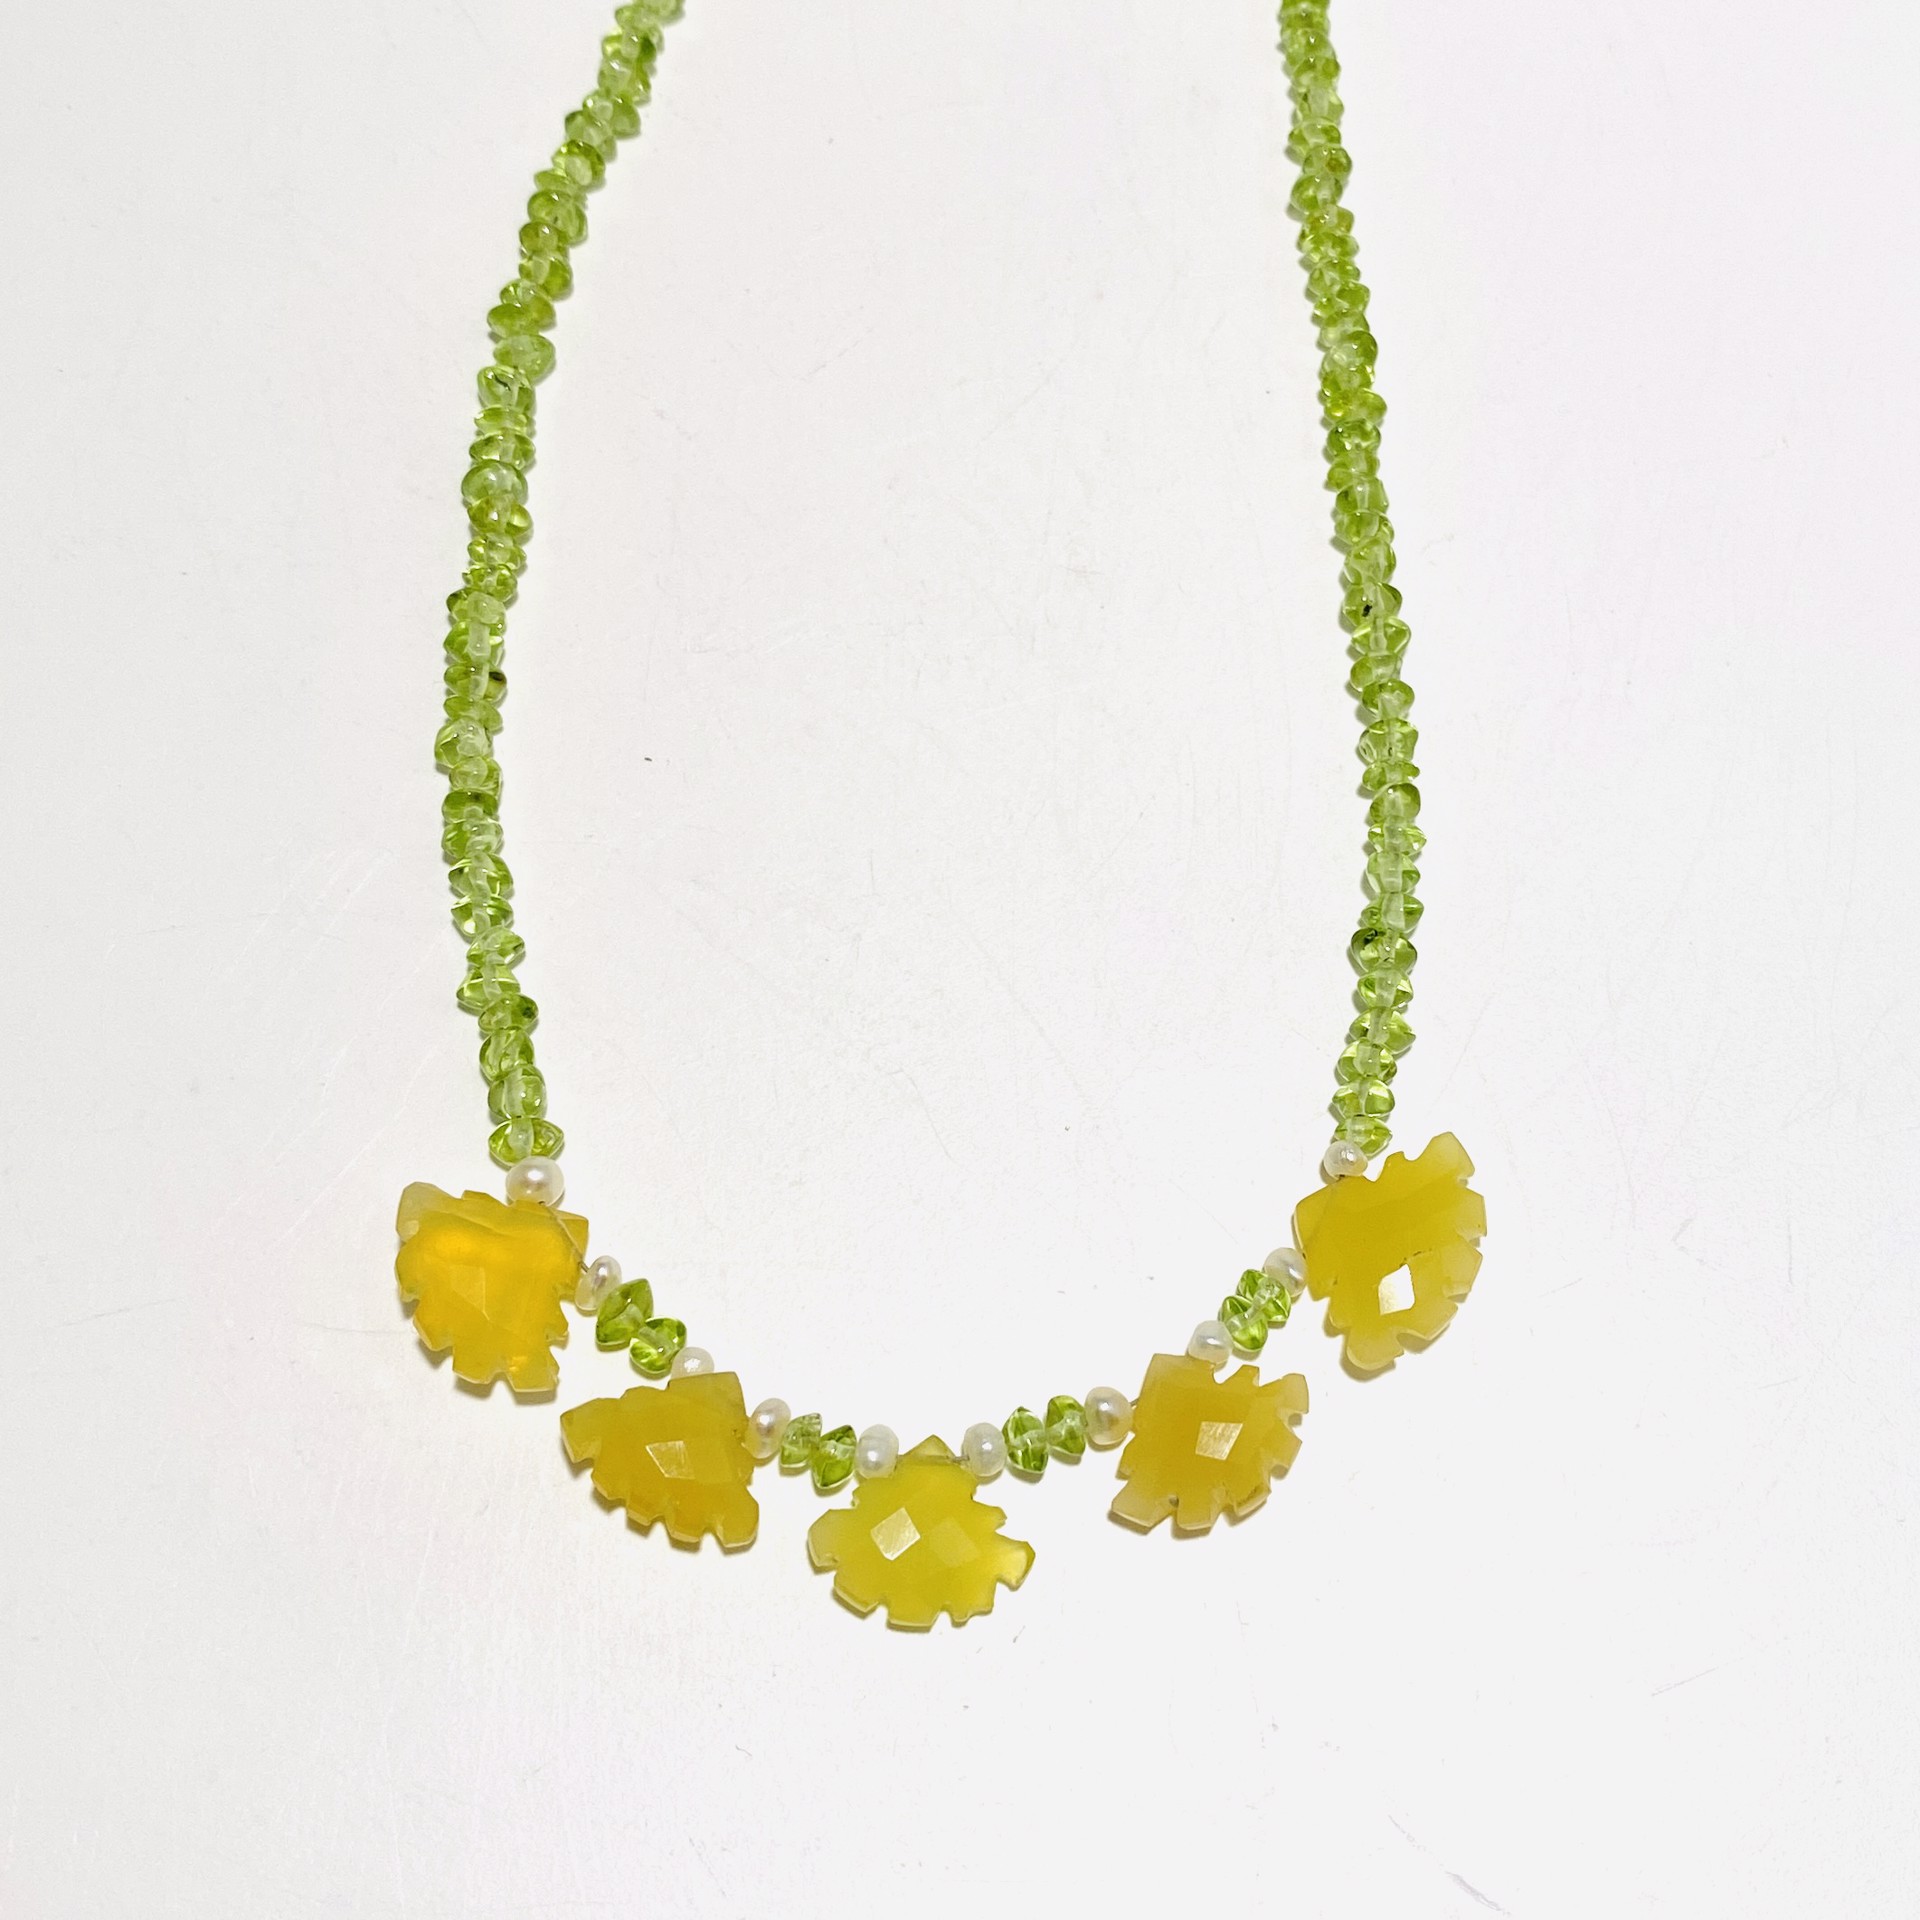 Faceted Peridot and Carved Chalcedony Necklace by Nance Trueworthy